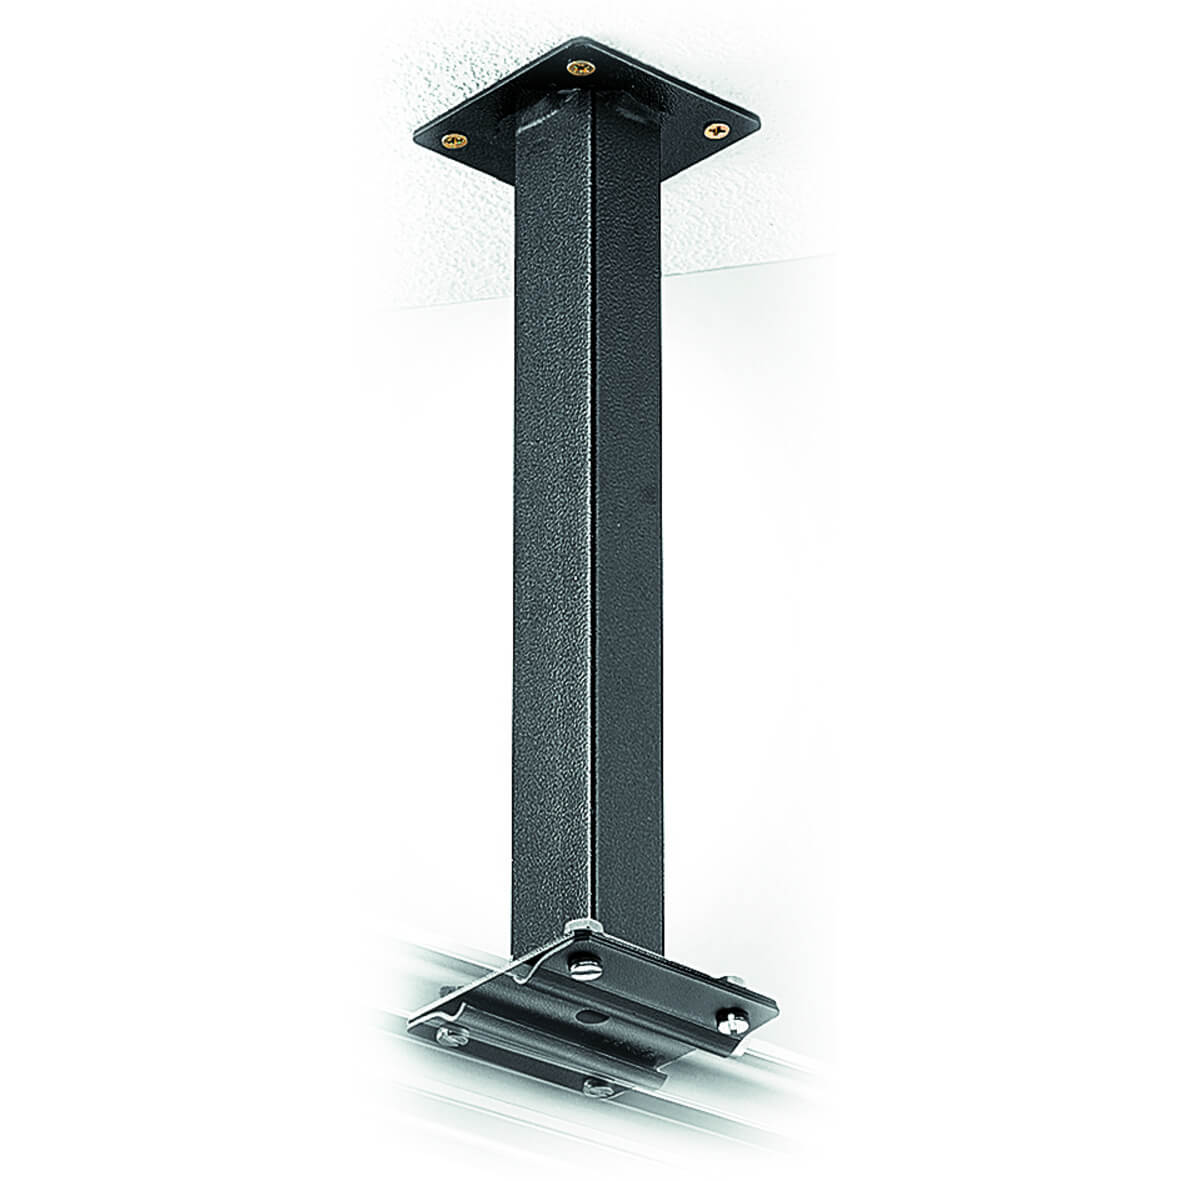 Ceiling Mount with Rail Exten siont Sky Track System FF3216,